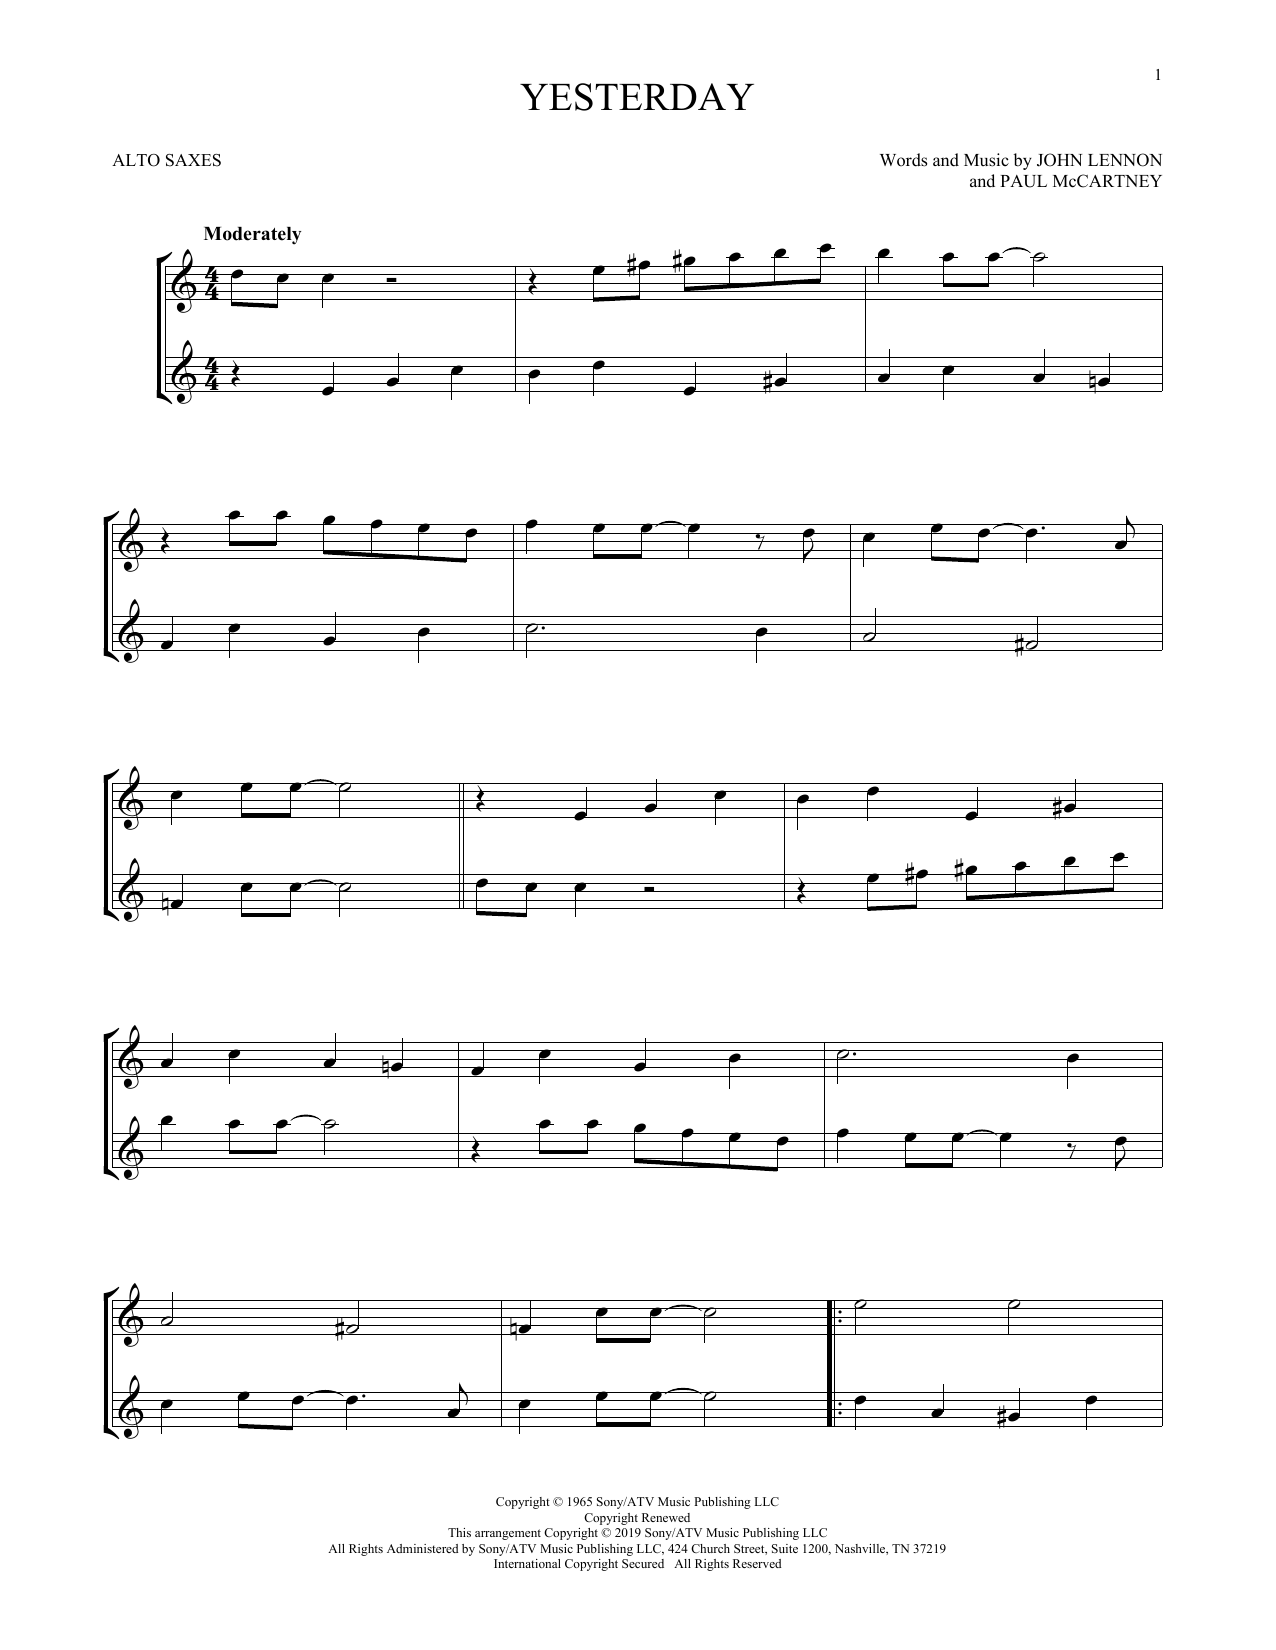 The Beatles Yesterday Chords Sheet Music Notes Download Pop